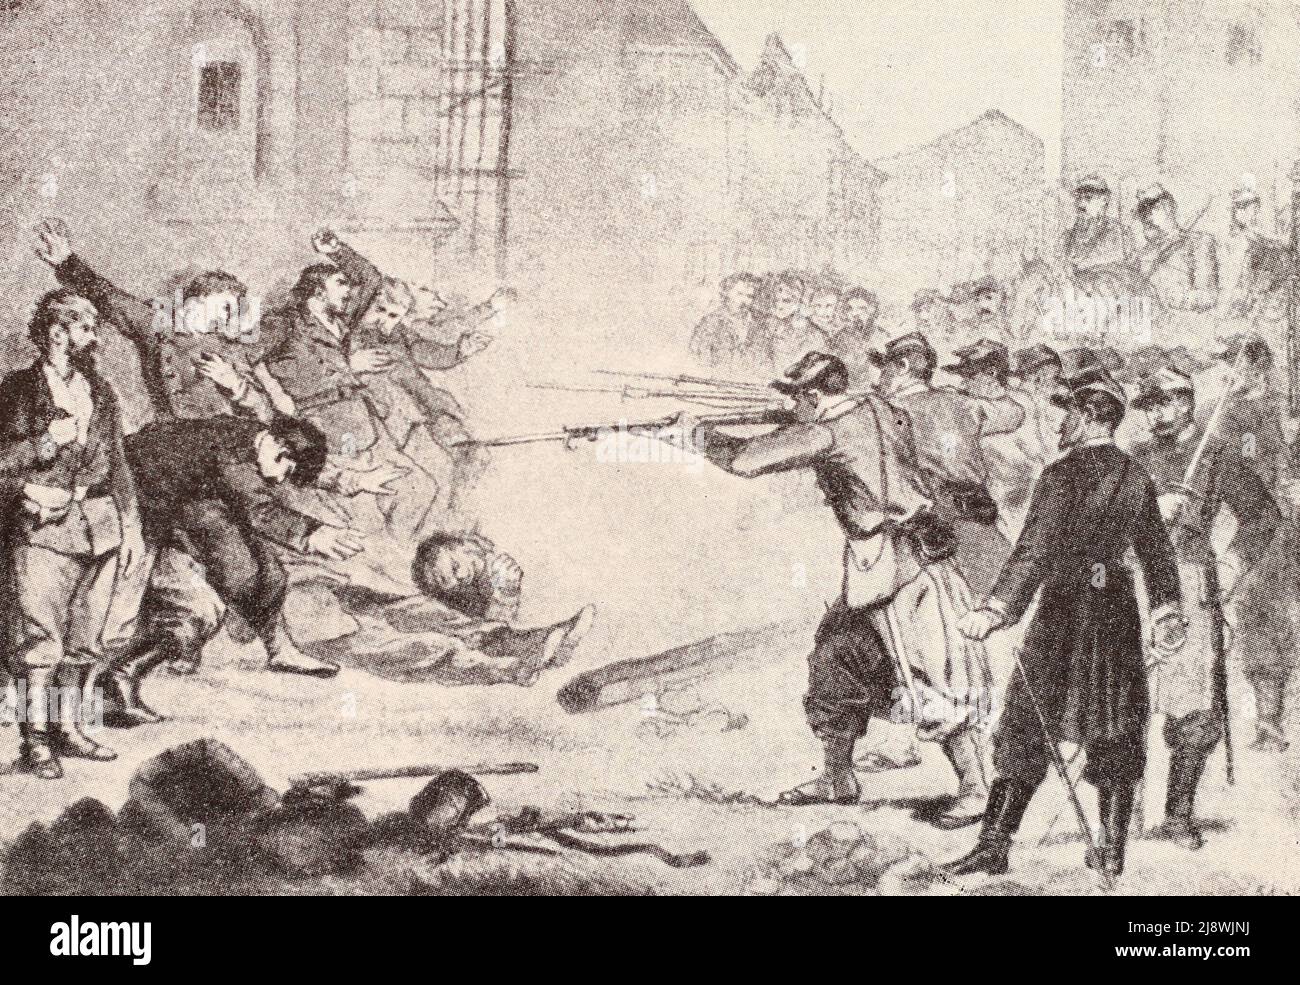 The execution of the Communards on one of the streets of Paris. Drawing from 1871. Stock Photo